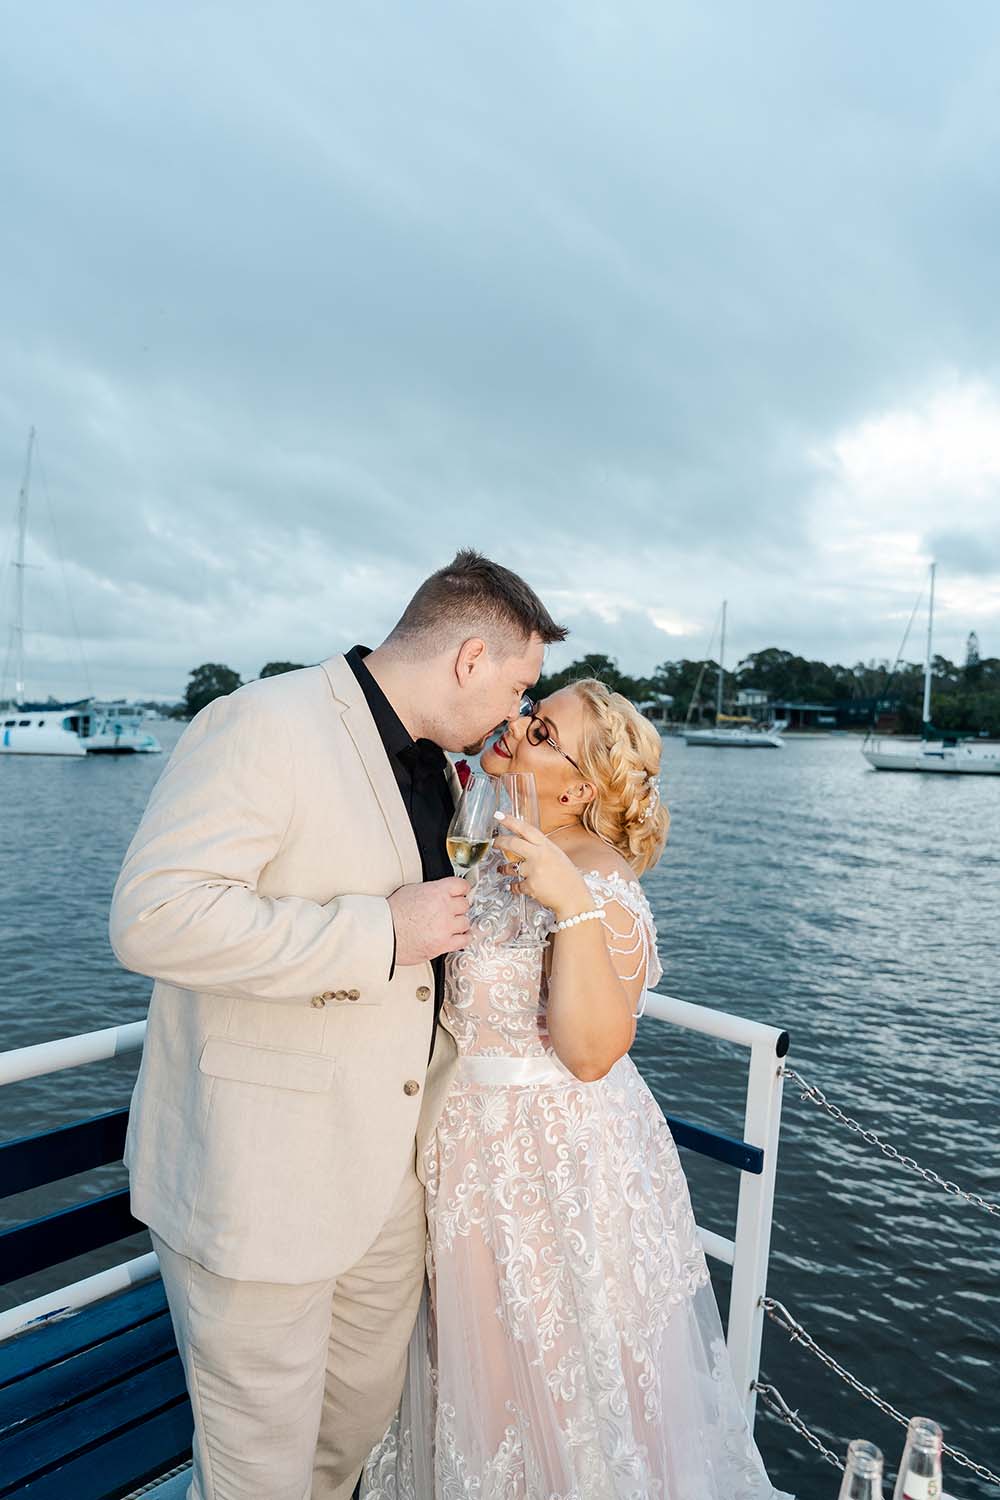 Destination Wedding Photography - Bride and Groom kissing on boat